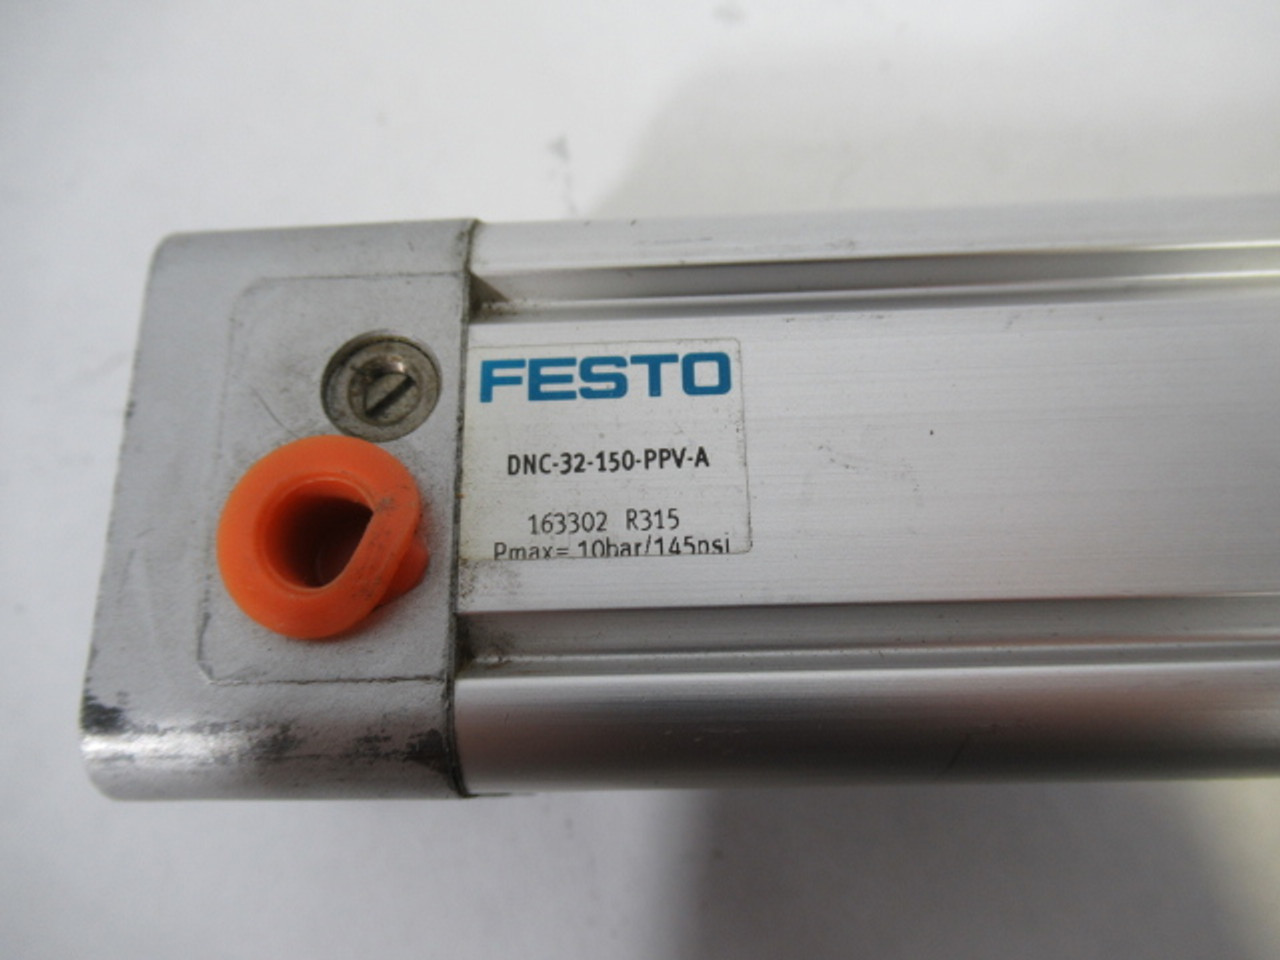 Festo 163302 DNC-32-150-PPV-A Pneumatic Cylinder 32mm Bore 150mm Stroke USED